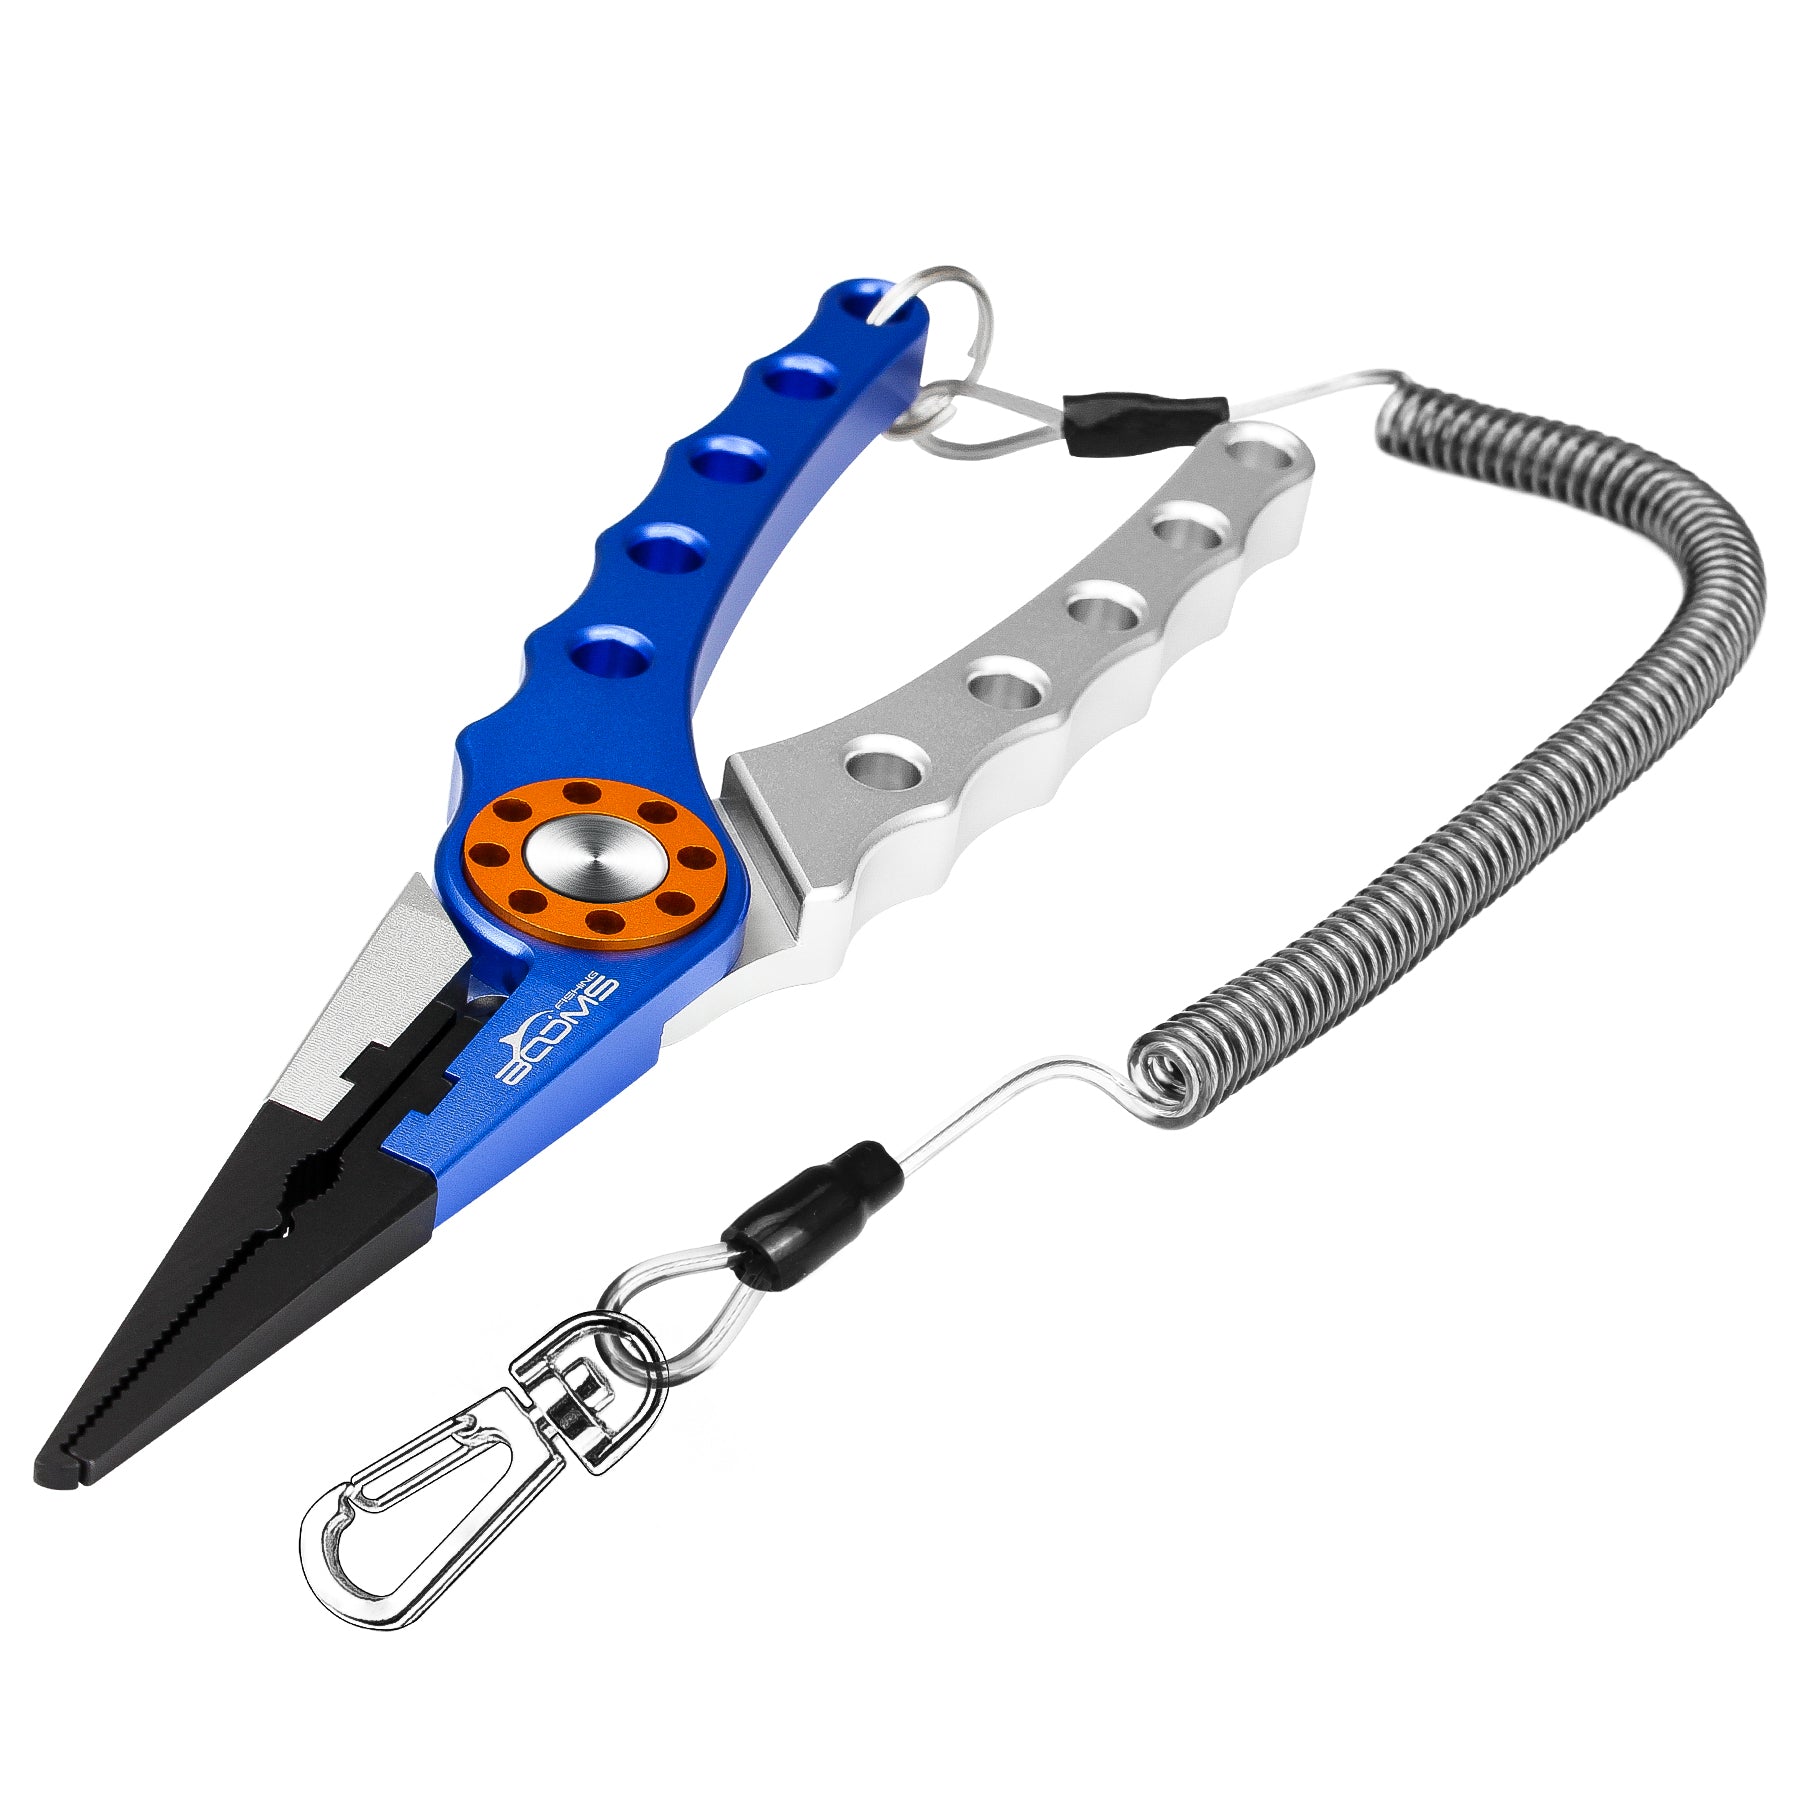 Stainless Steel Fishing Pliers Saltwater Anti-corrosion Fishing